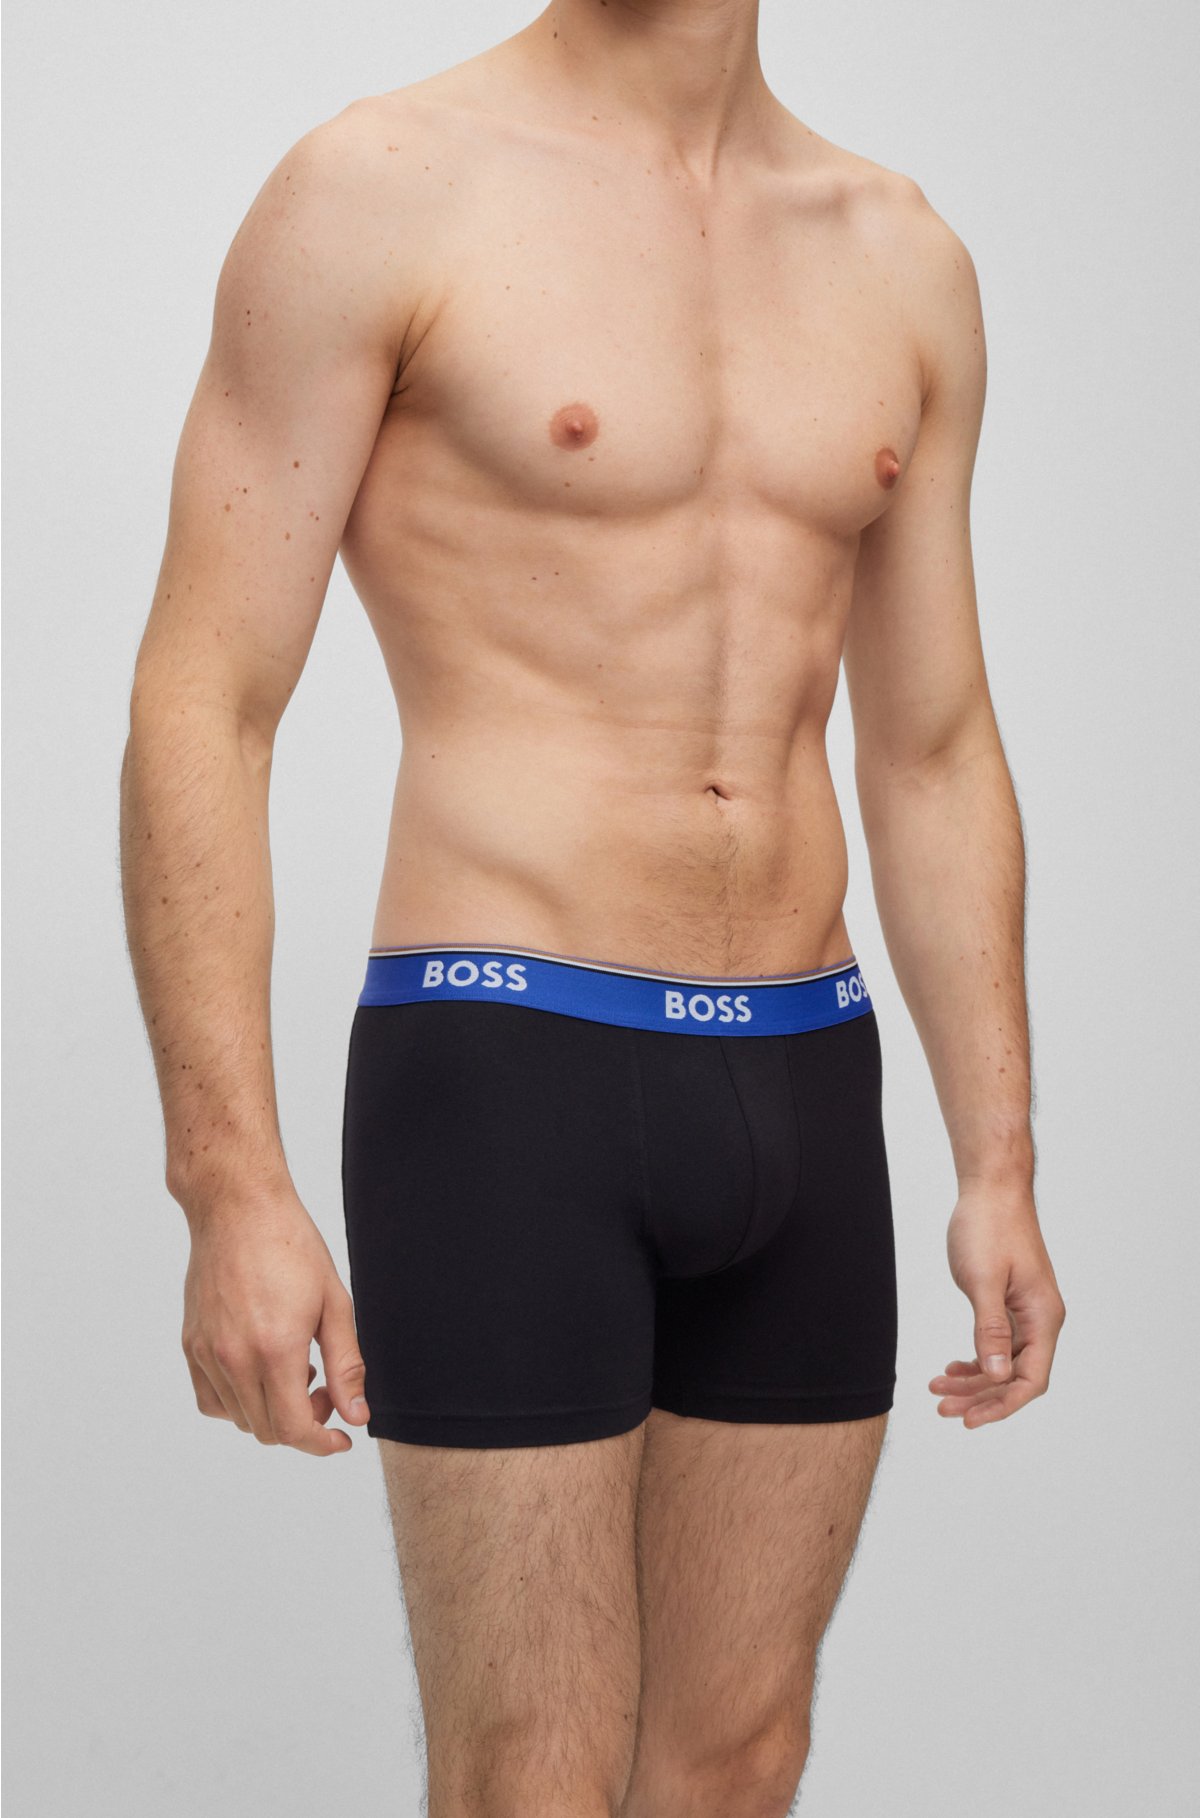 The logo on the waistband shows everybody exactly what's up. Clean, classy,  and fitted, these Boxer briefs are a sophisticated way to go.